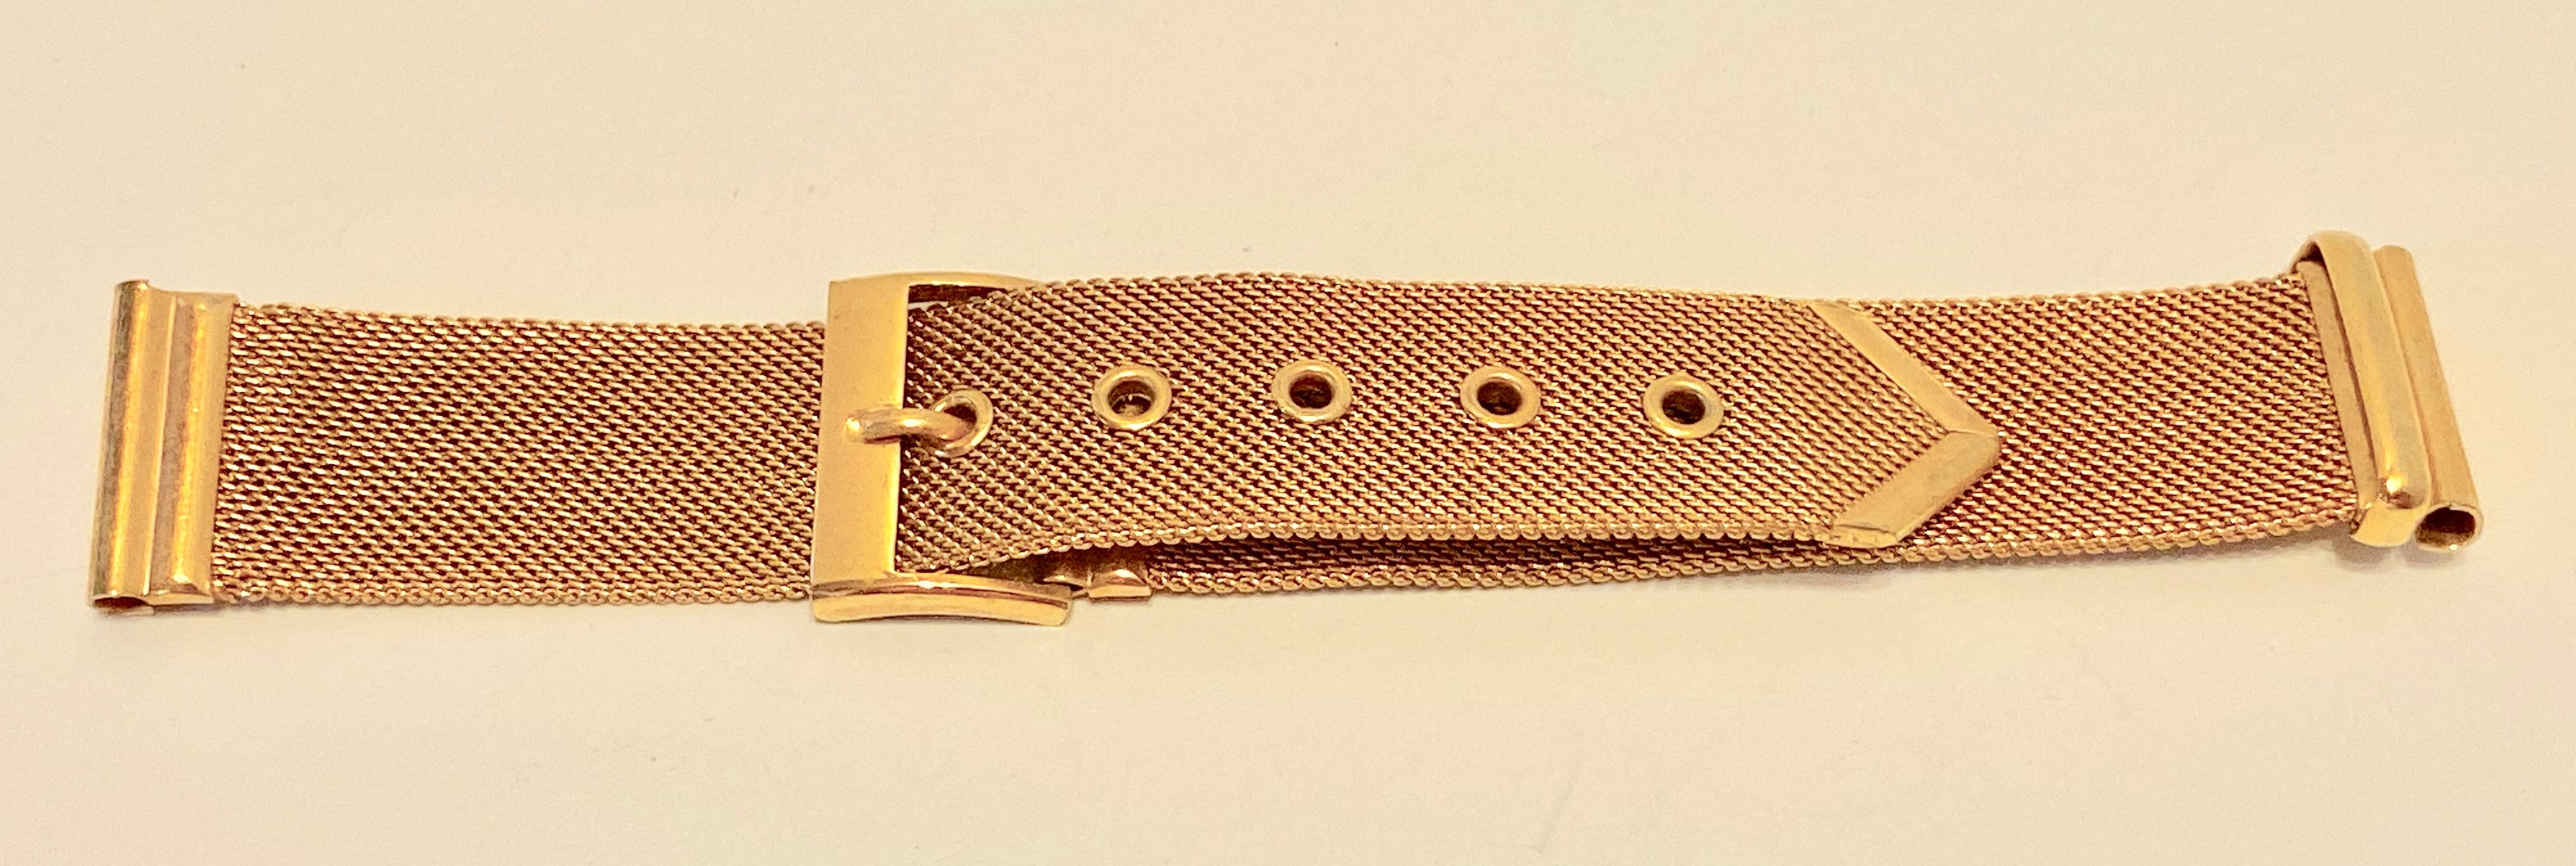 Micro Gold Hardware Mesh 'Buckle' Style Adjustable Watch Strap For Sale 3